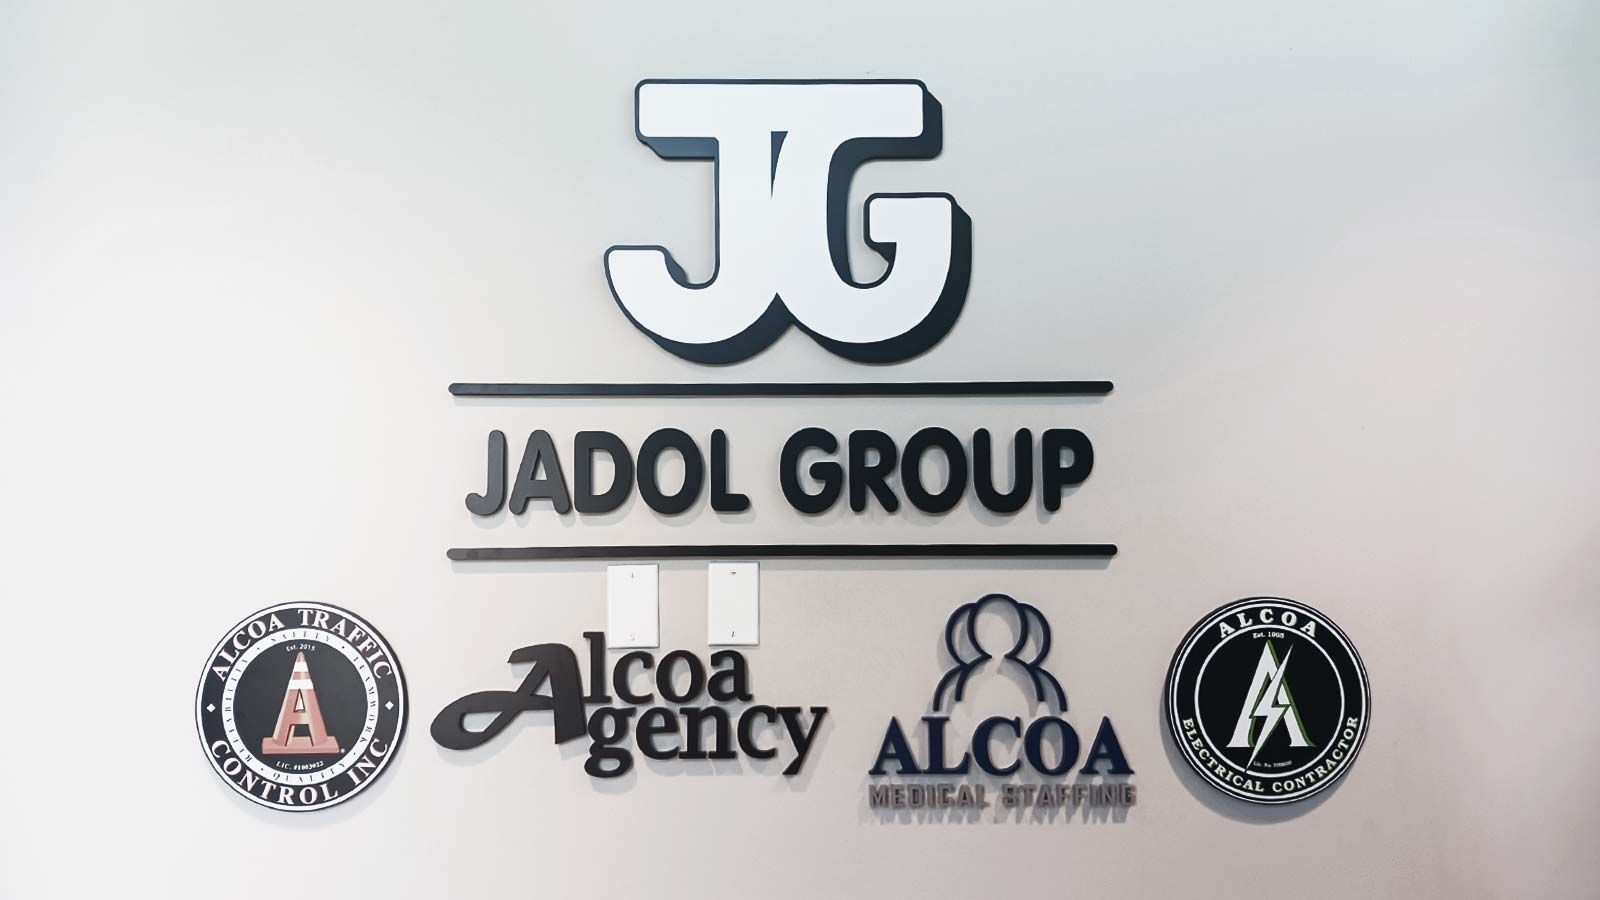 Jadol Group interior sign attached to the wall